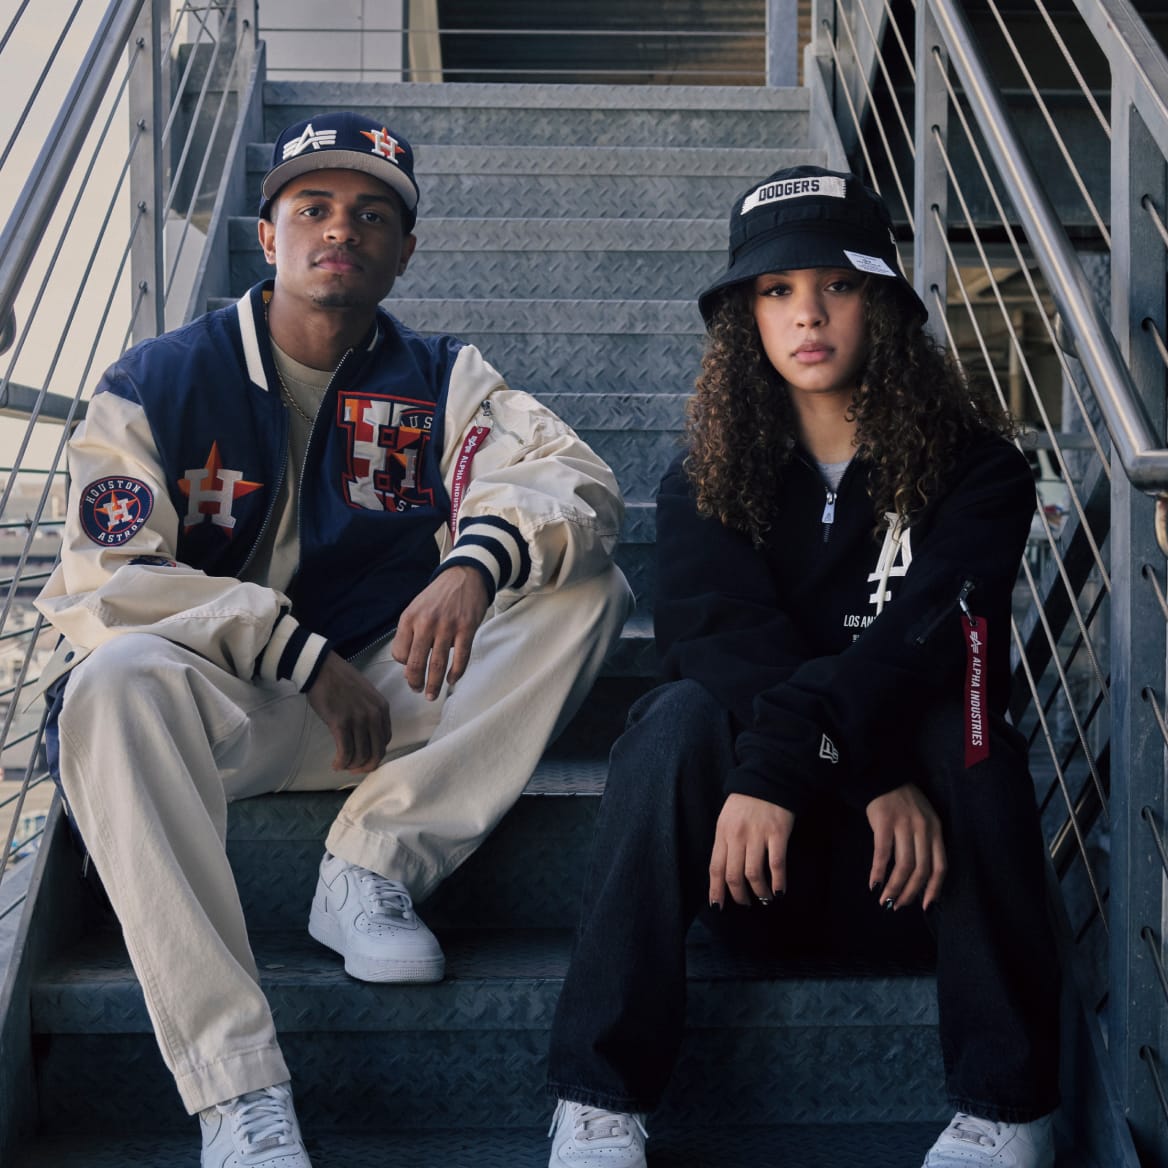 <p>Take your look to new heights. Check out the Alpha Industries X New Era collection, available in the iconic 59FIFTY, MA-1 Bomber Jacket, and more.</p>